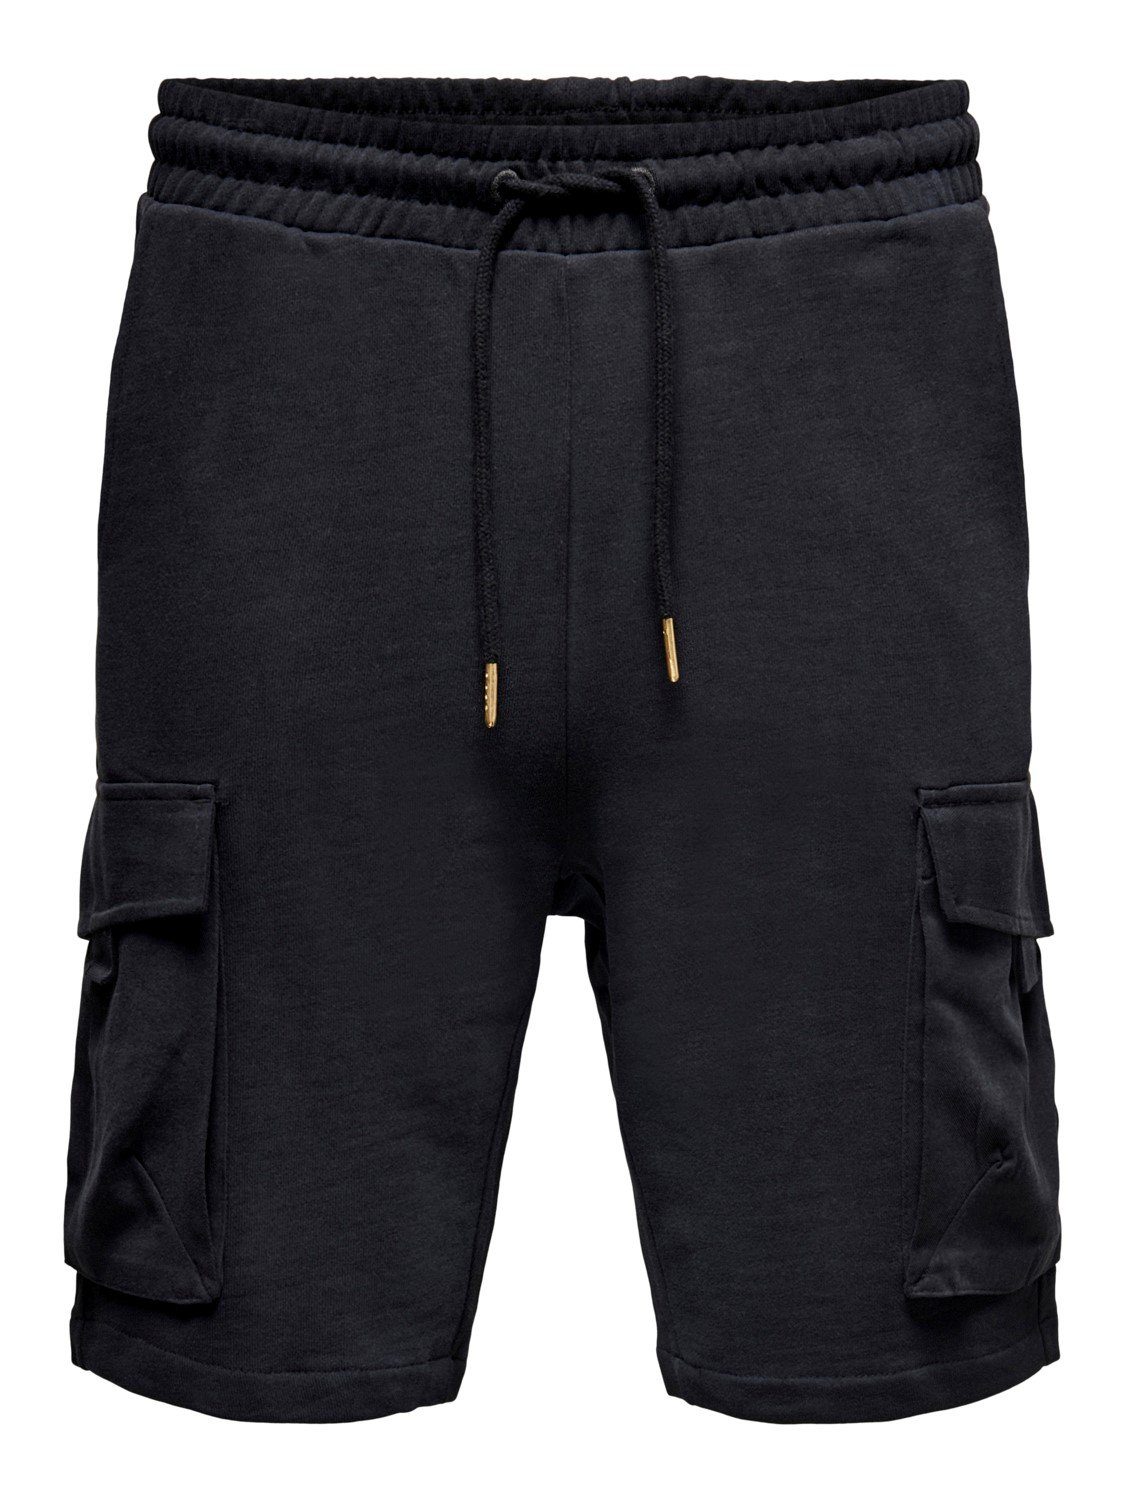 Baumwolle ONSNICKY aus 22019126 & SONS Black Shorts ONLY